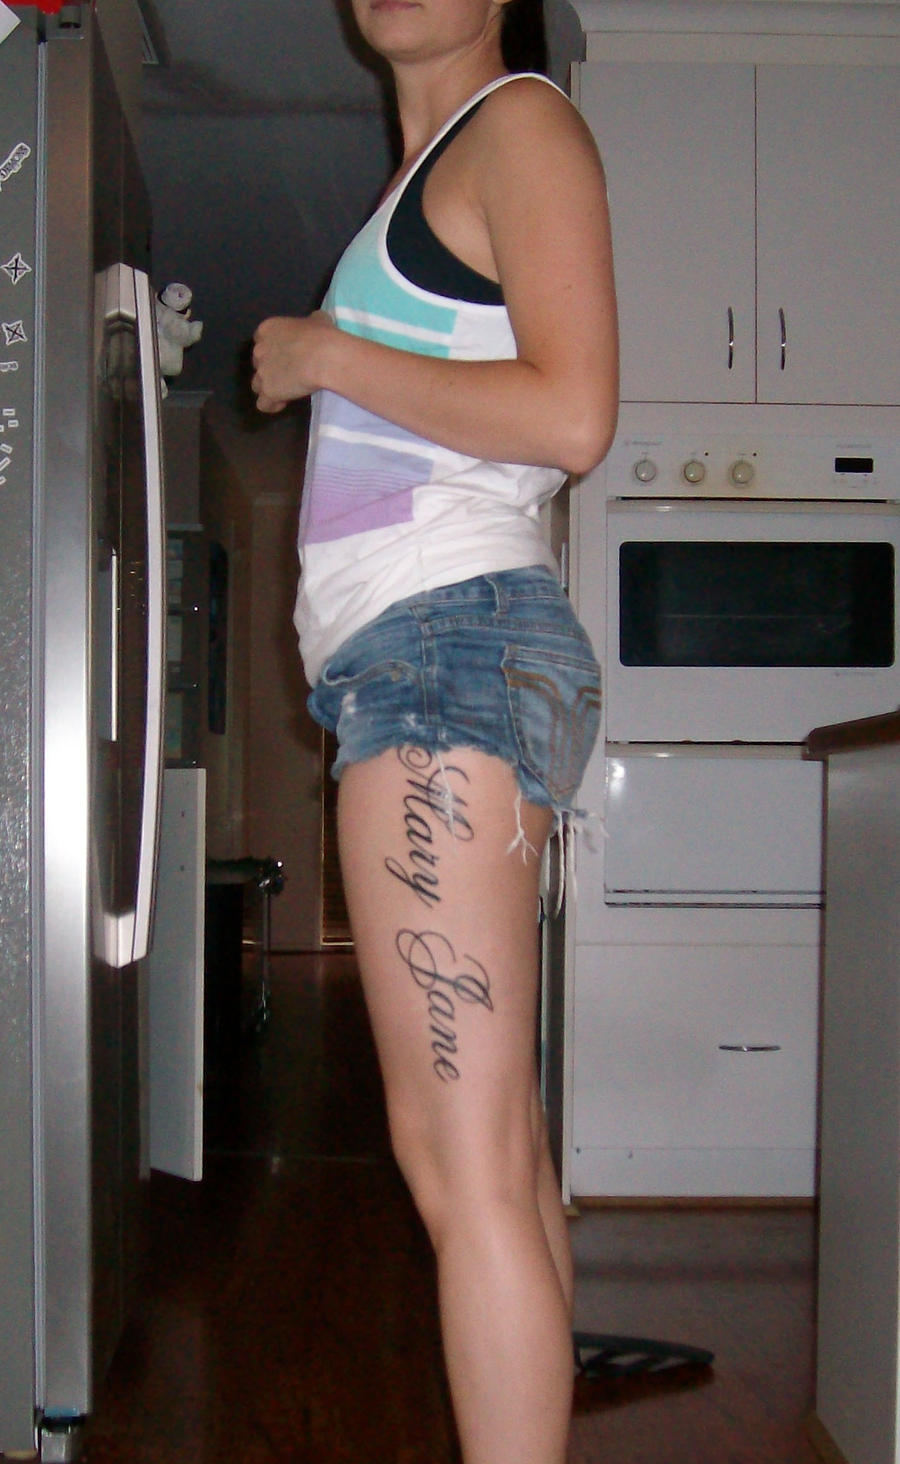 The Girl With Leg tattoos 23